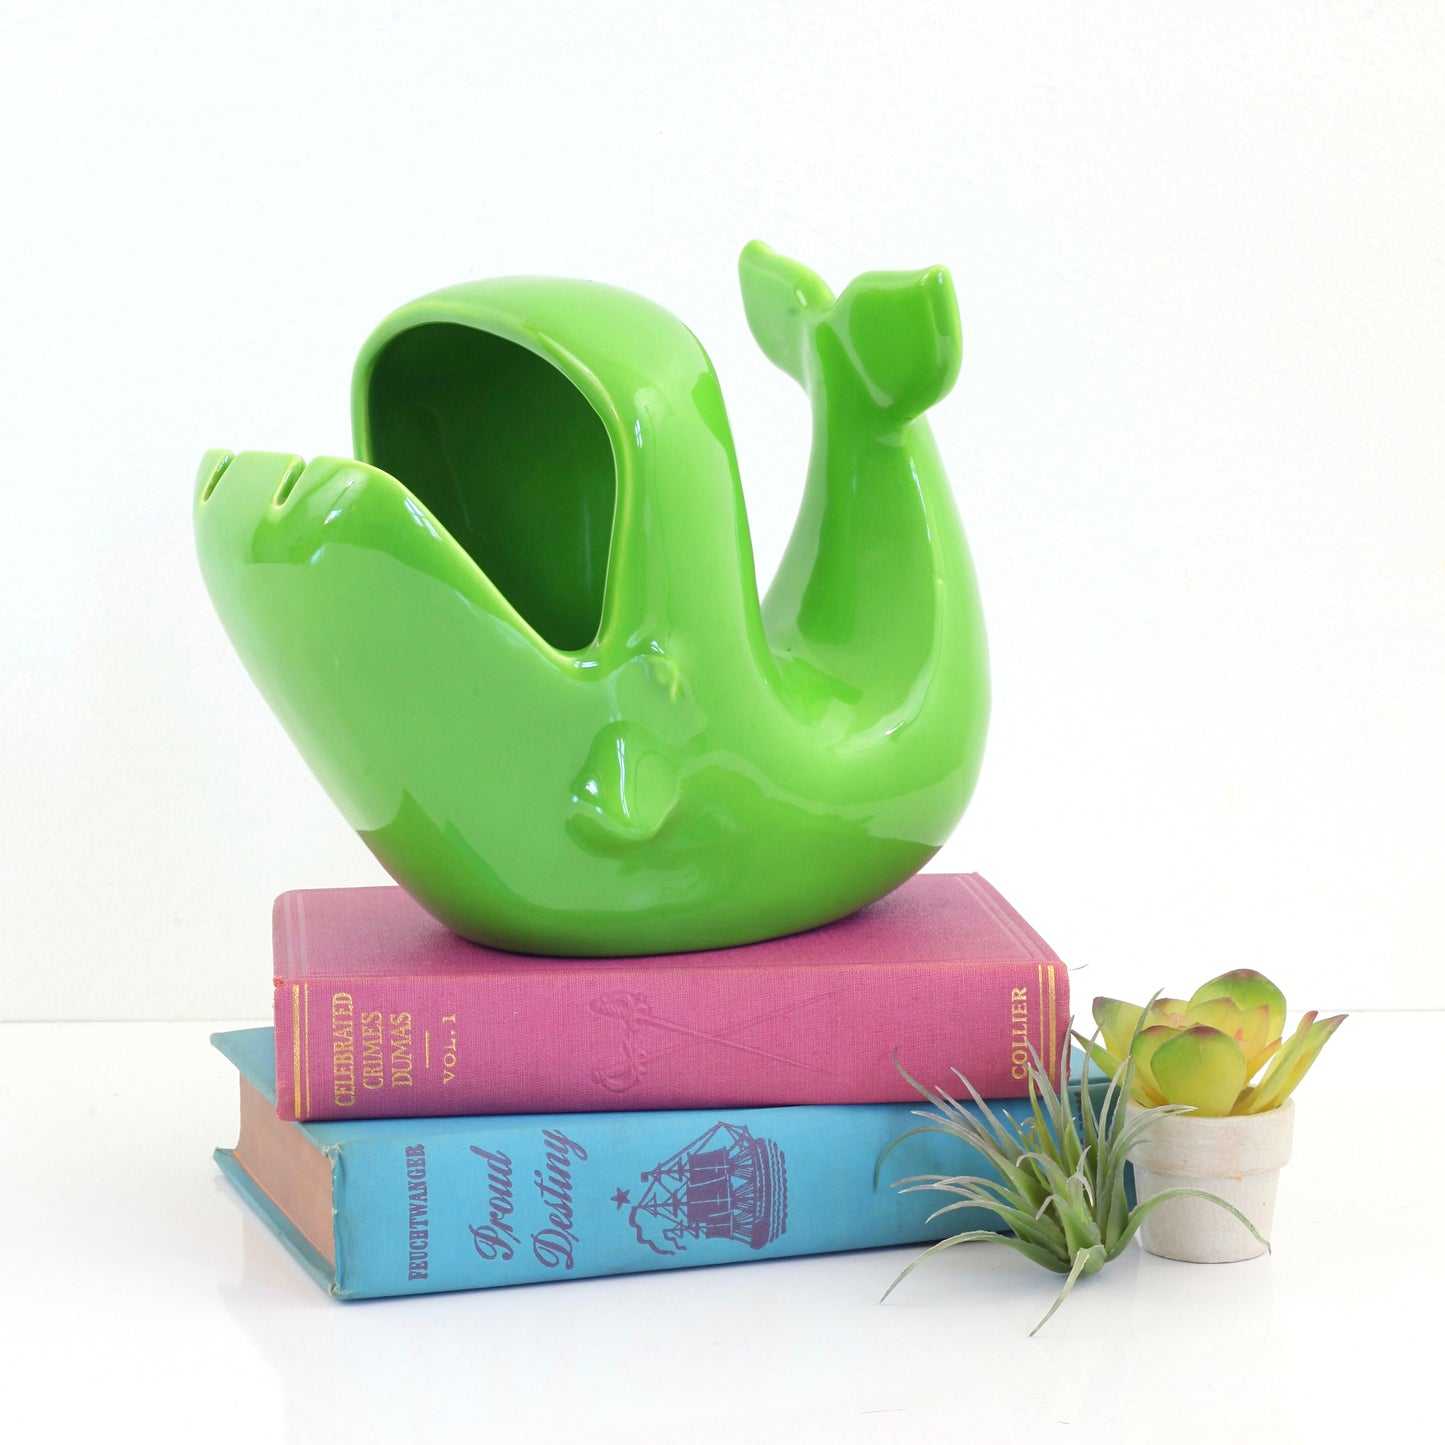 SOLD - Mid Century Modern Vohann of California Lime Green Whale Ashtray